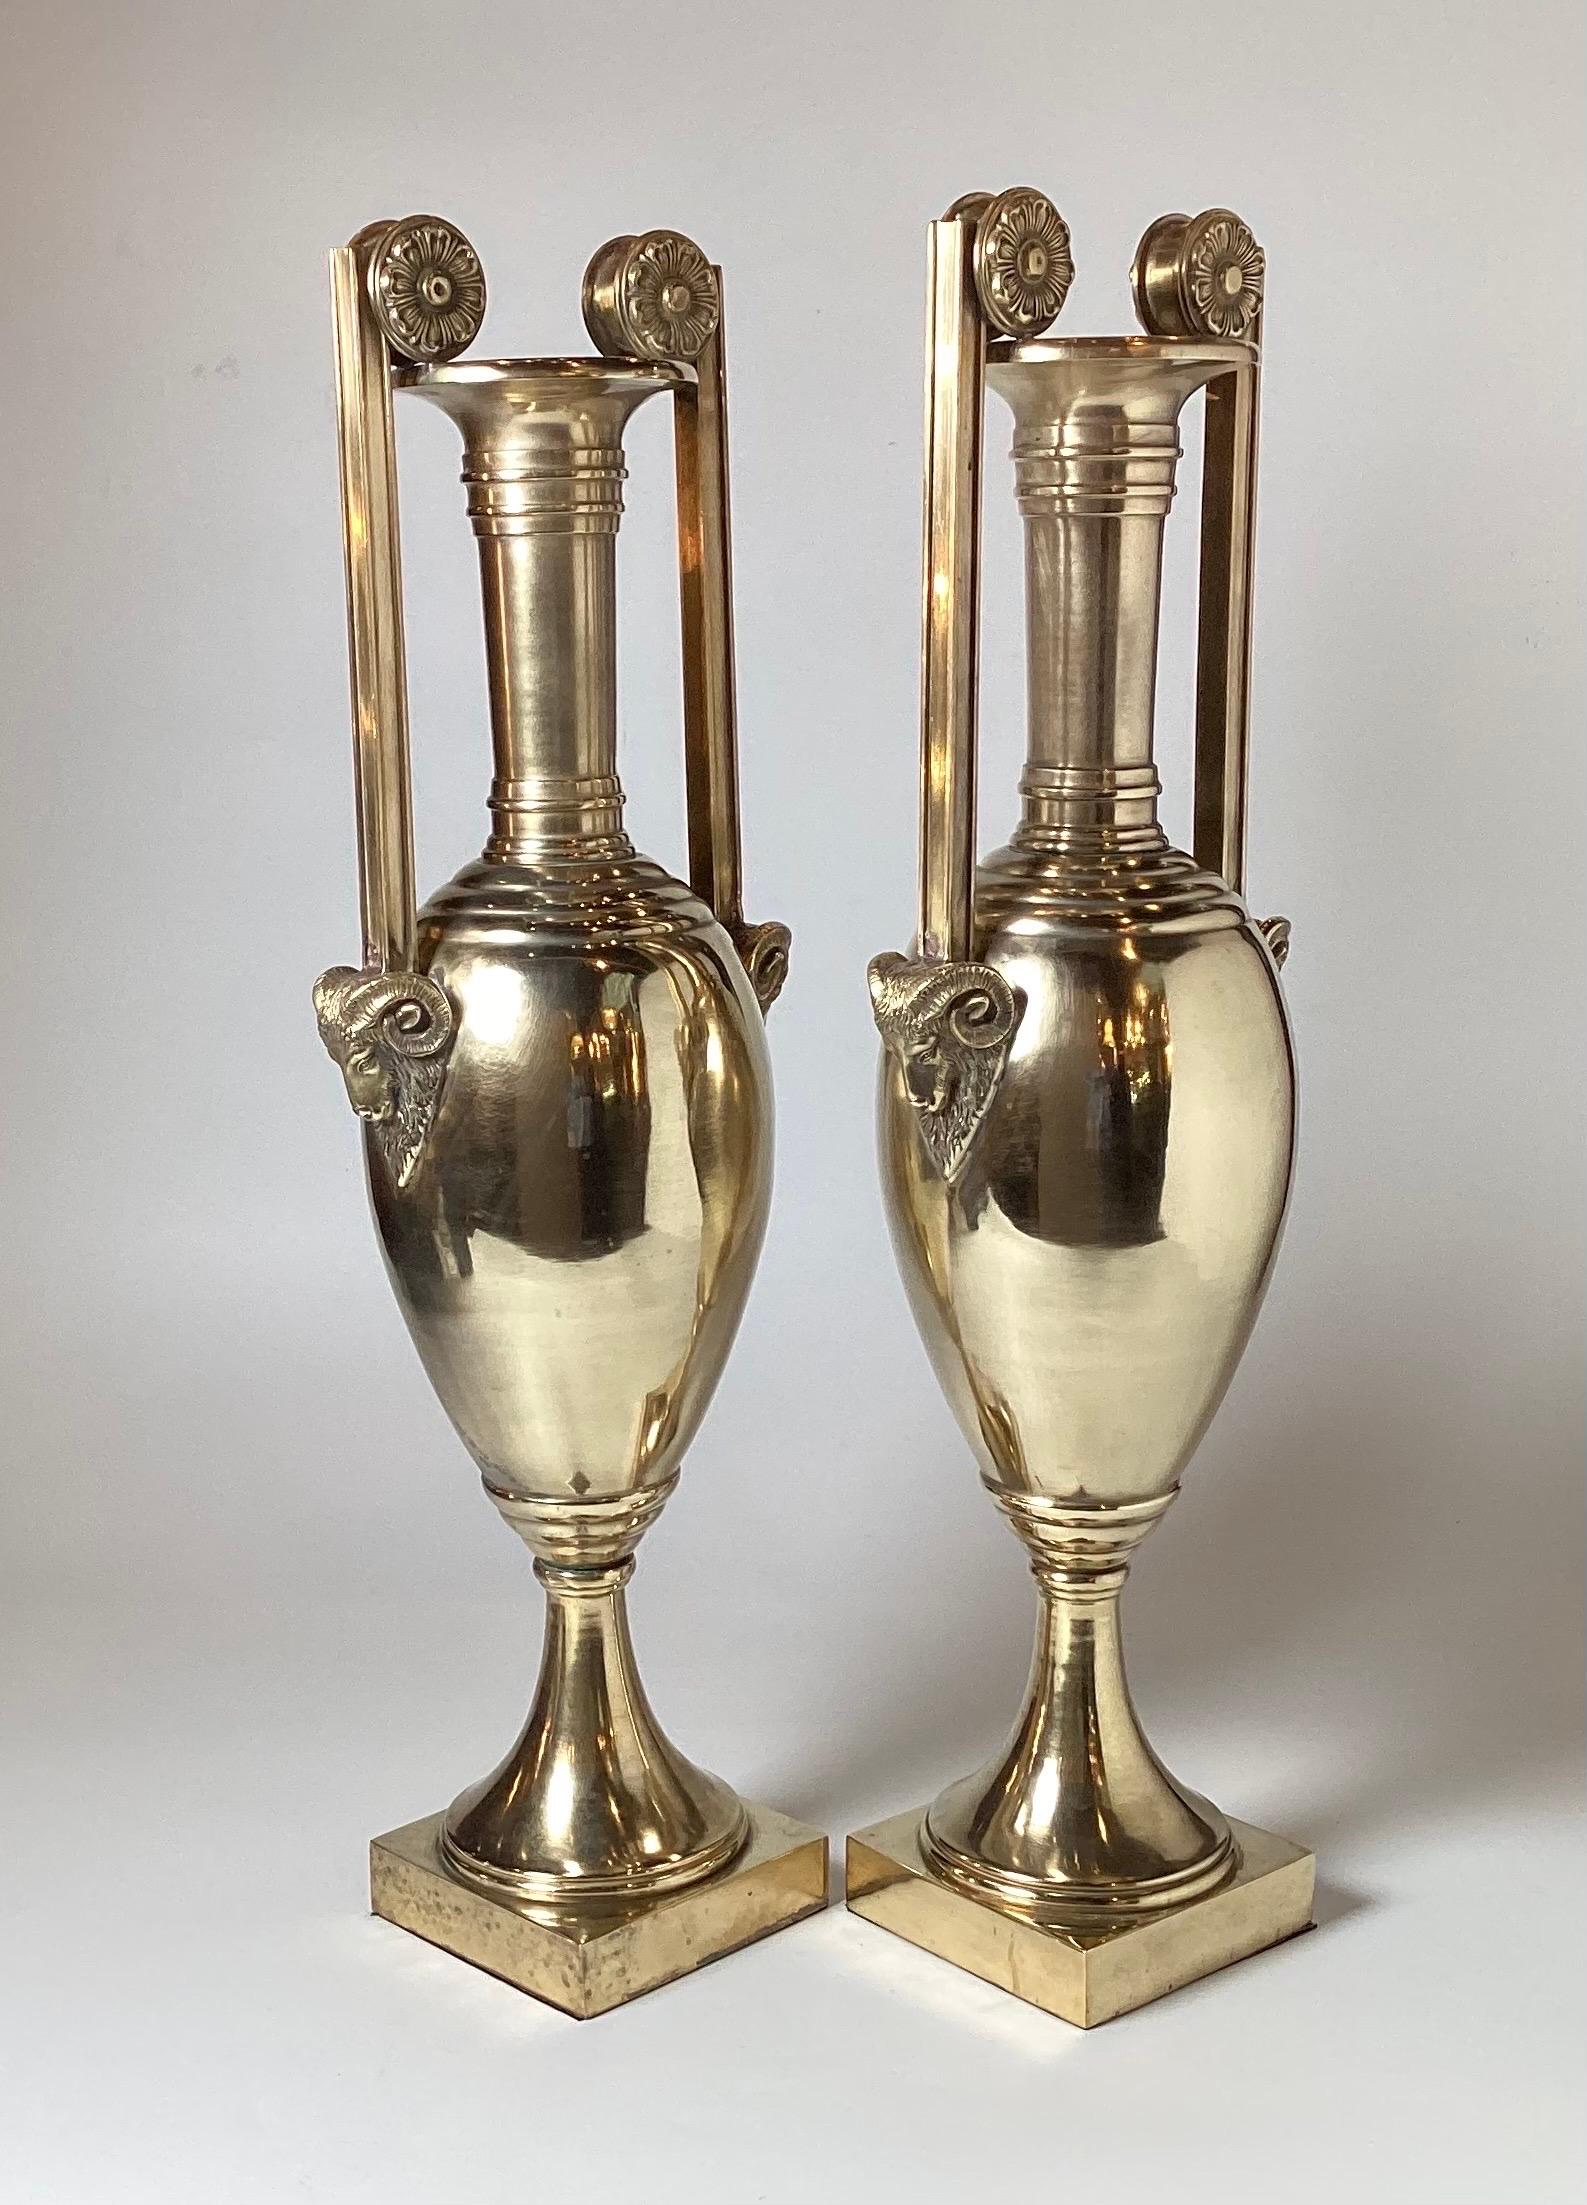 Tall Pair of Cast Polished Brass Neoclassical Urns In Excellent Condition For Sale In Lambertville, NJ